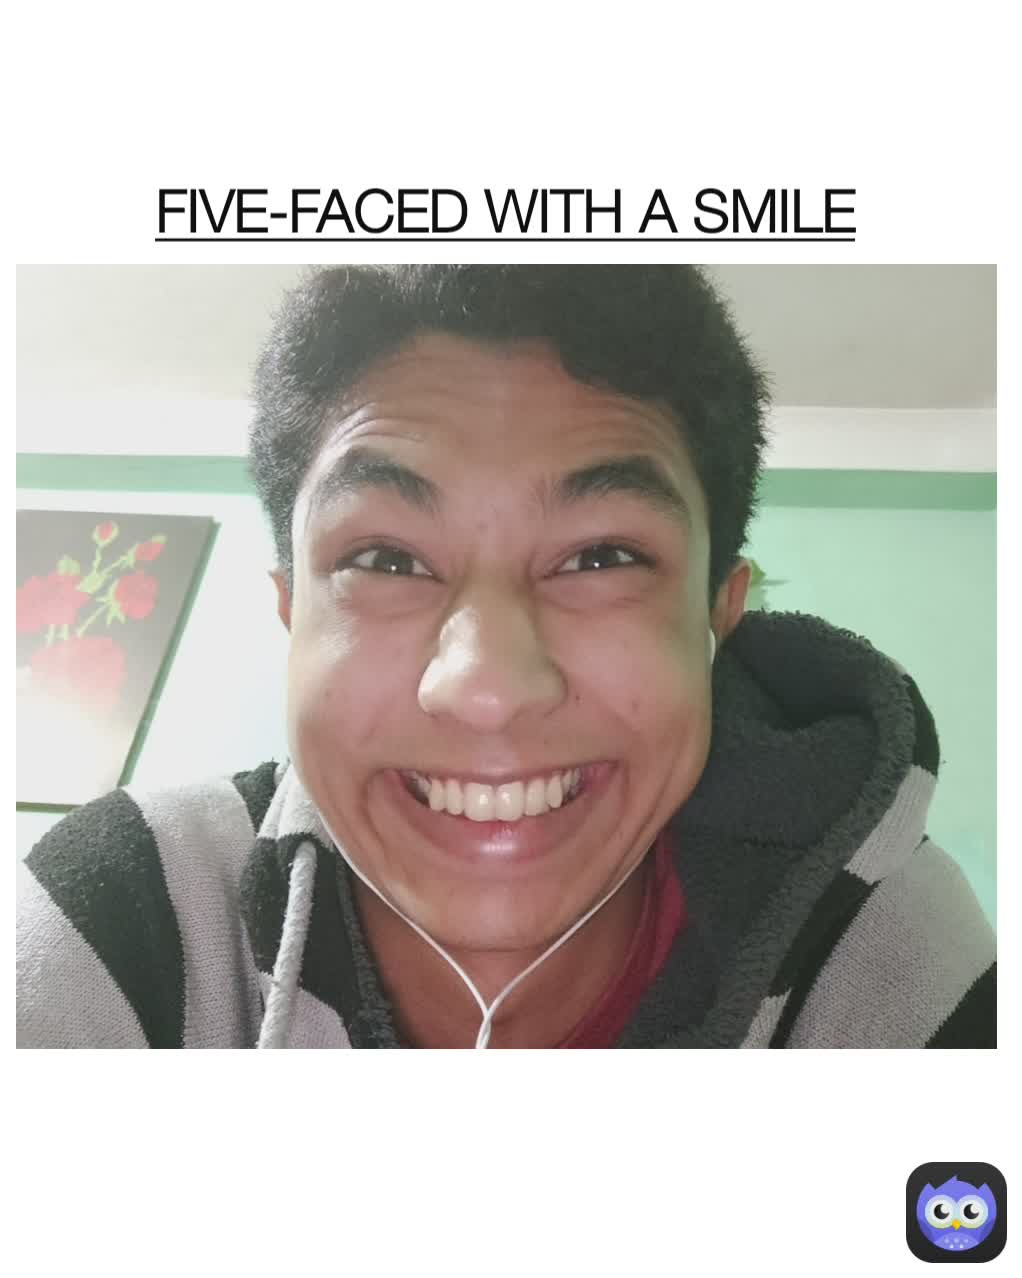 FIVE-FACED WITH A SMILE